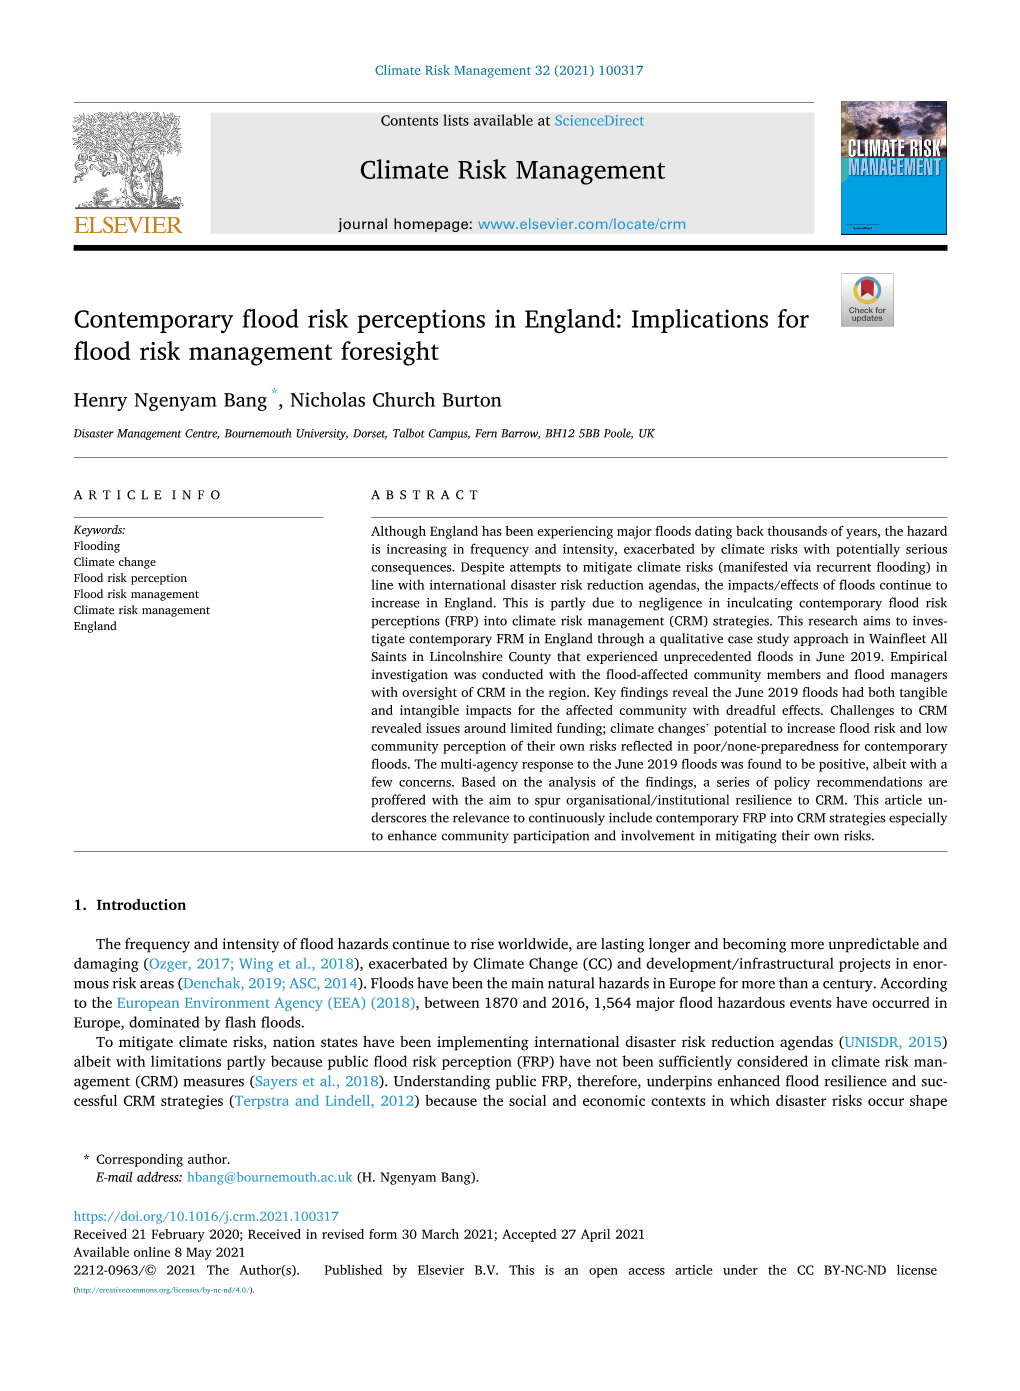 Implications for Flood Risk Management Foresight